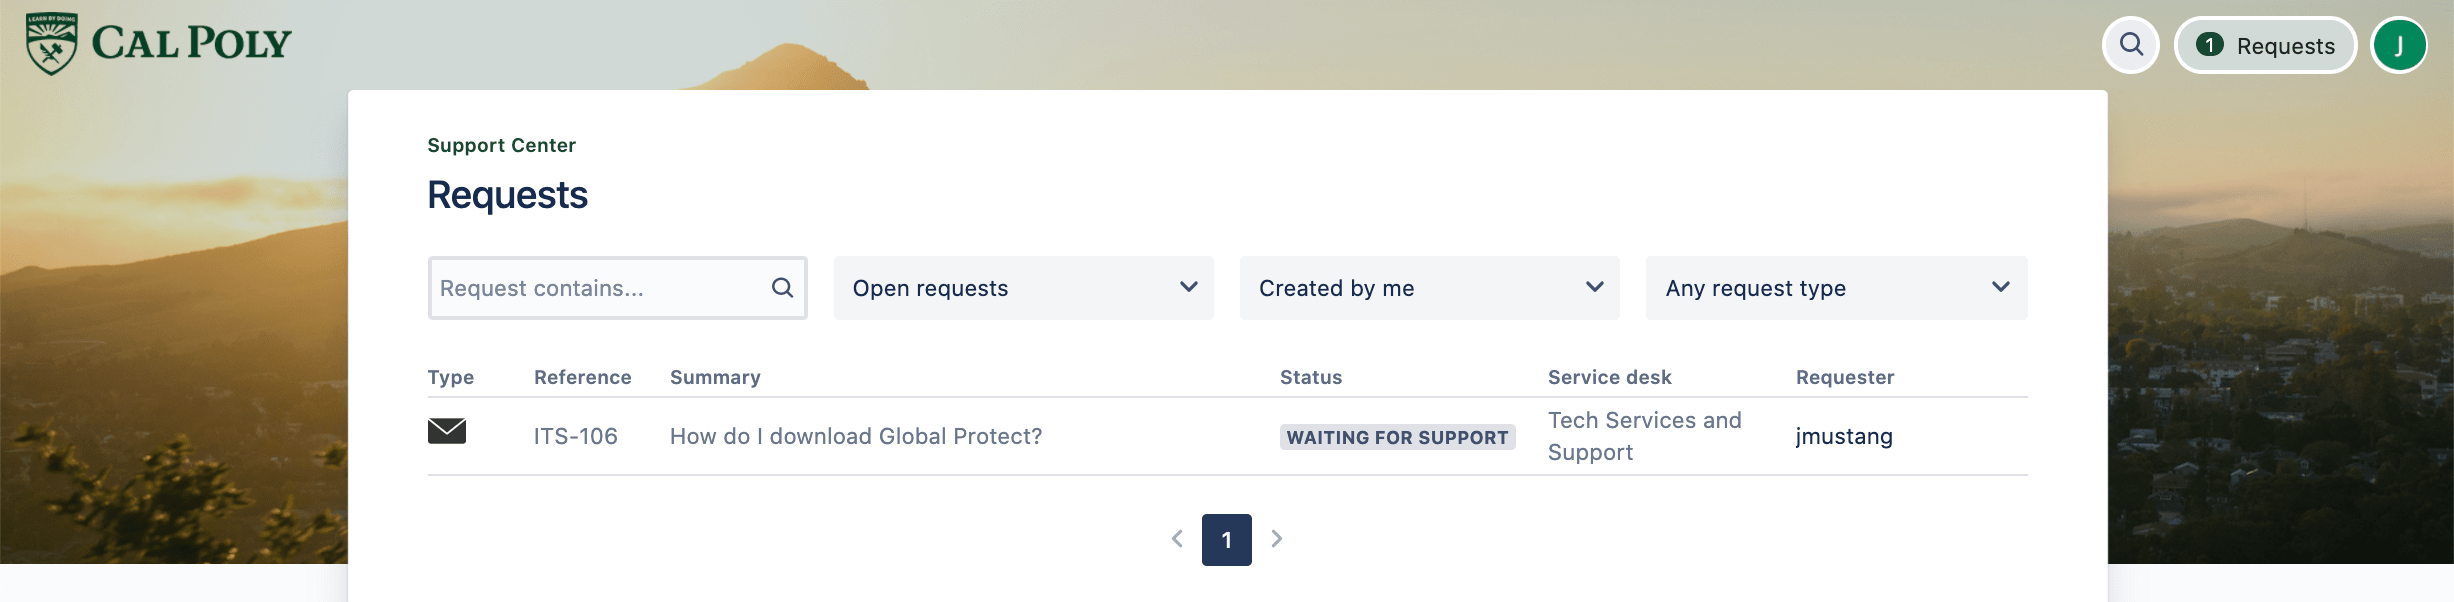 Screenshot of Cal Poly Support Center Requests log screen.